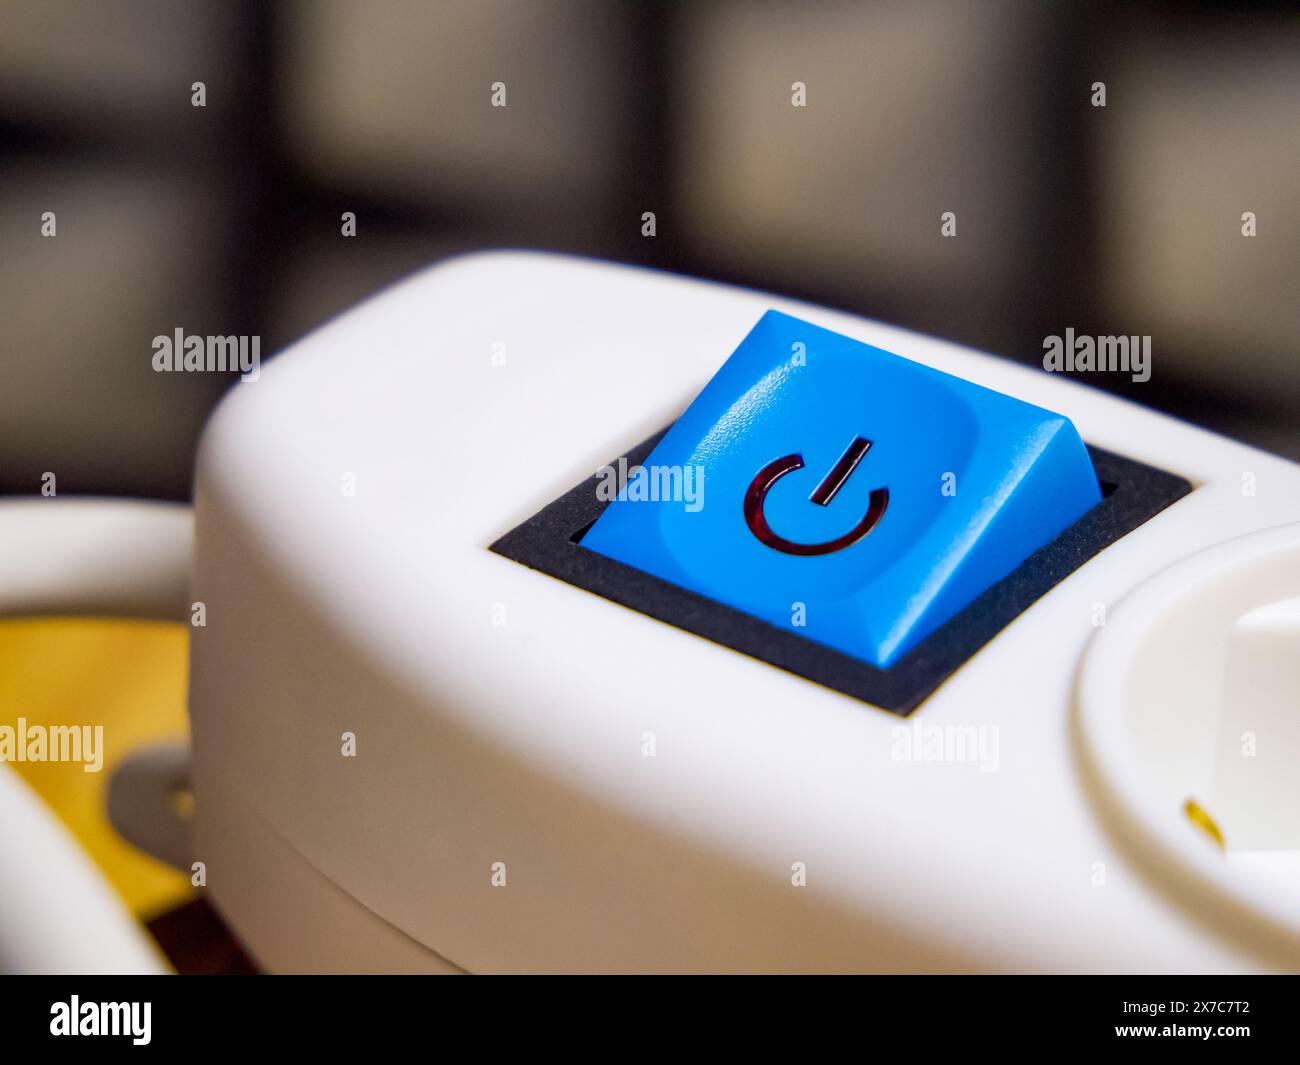 Close-up of a blue button, icon, on white equipment, indicating operation and control. Stock Photo